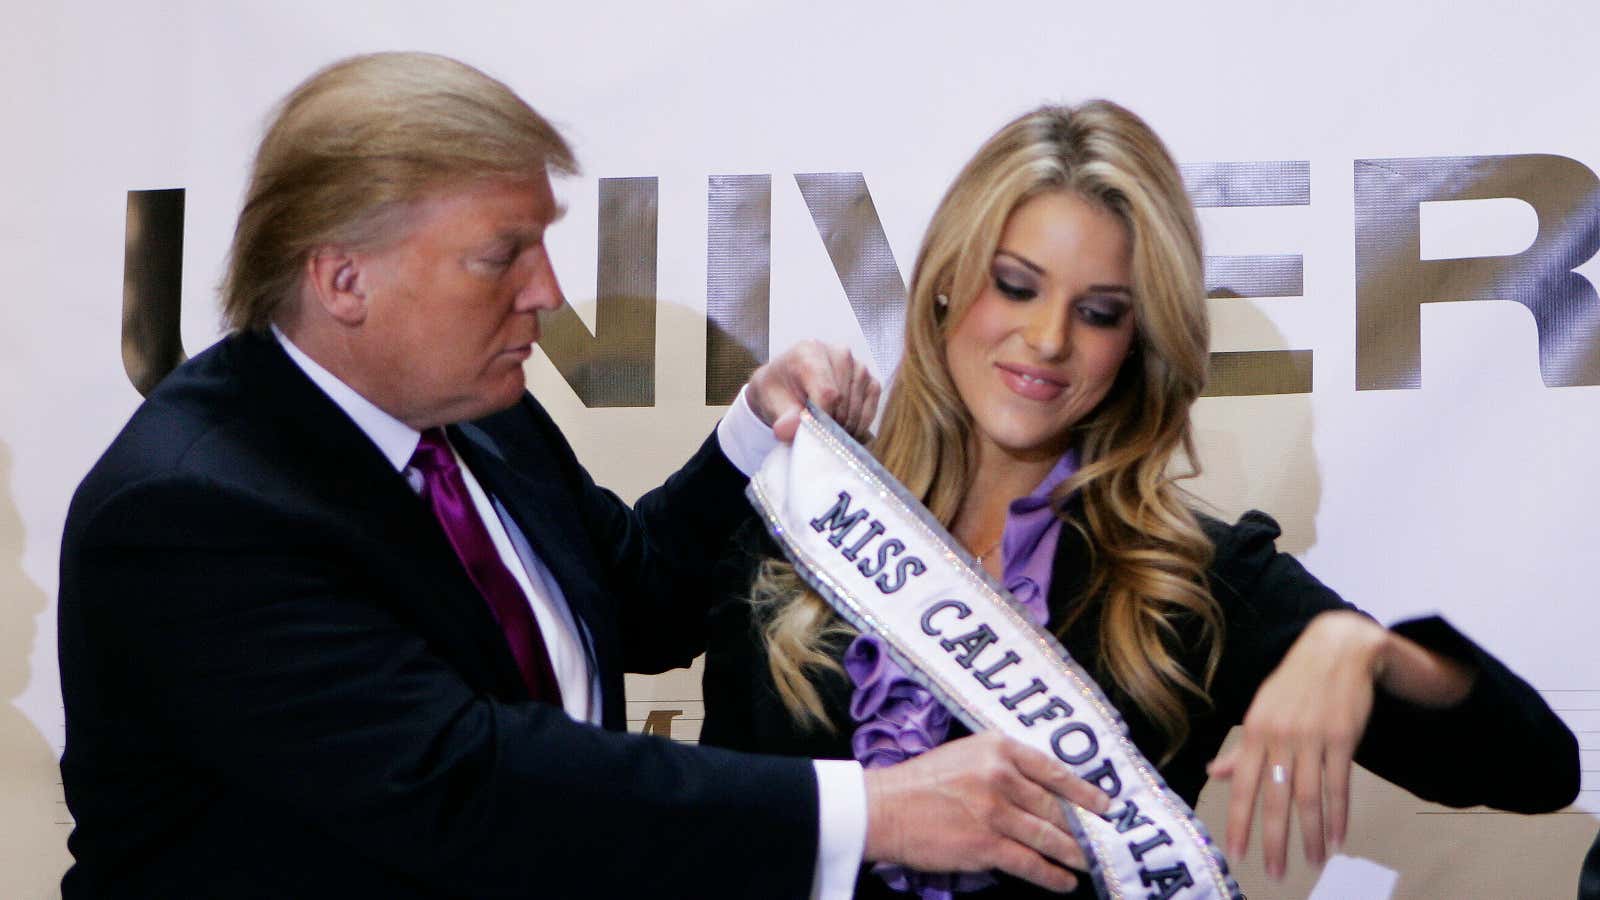 Step away from Miss California, Donald.